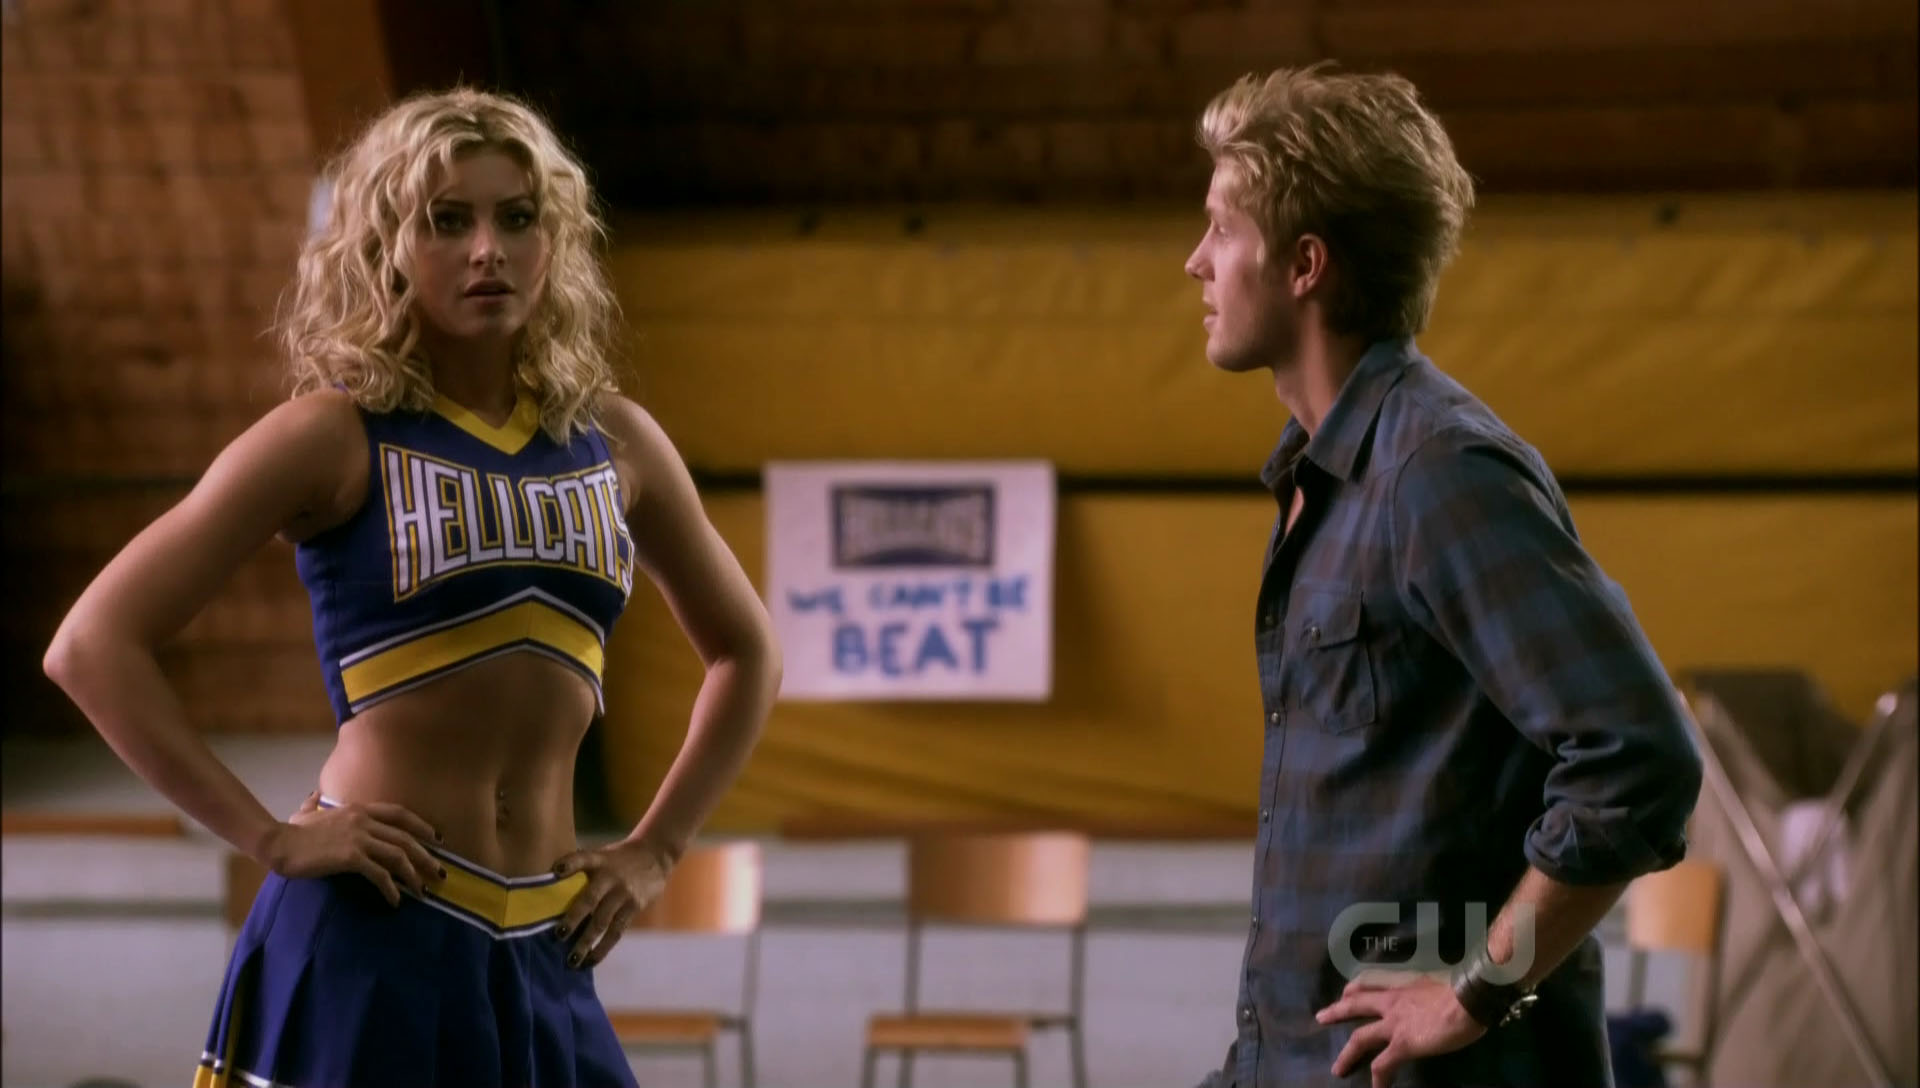 Alyson Michalka in Hellcats - Picture 13 of 73. 